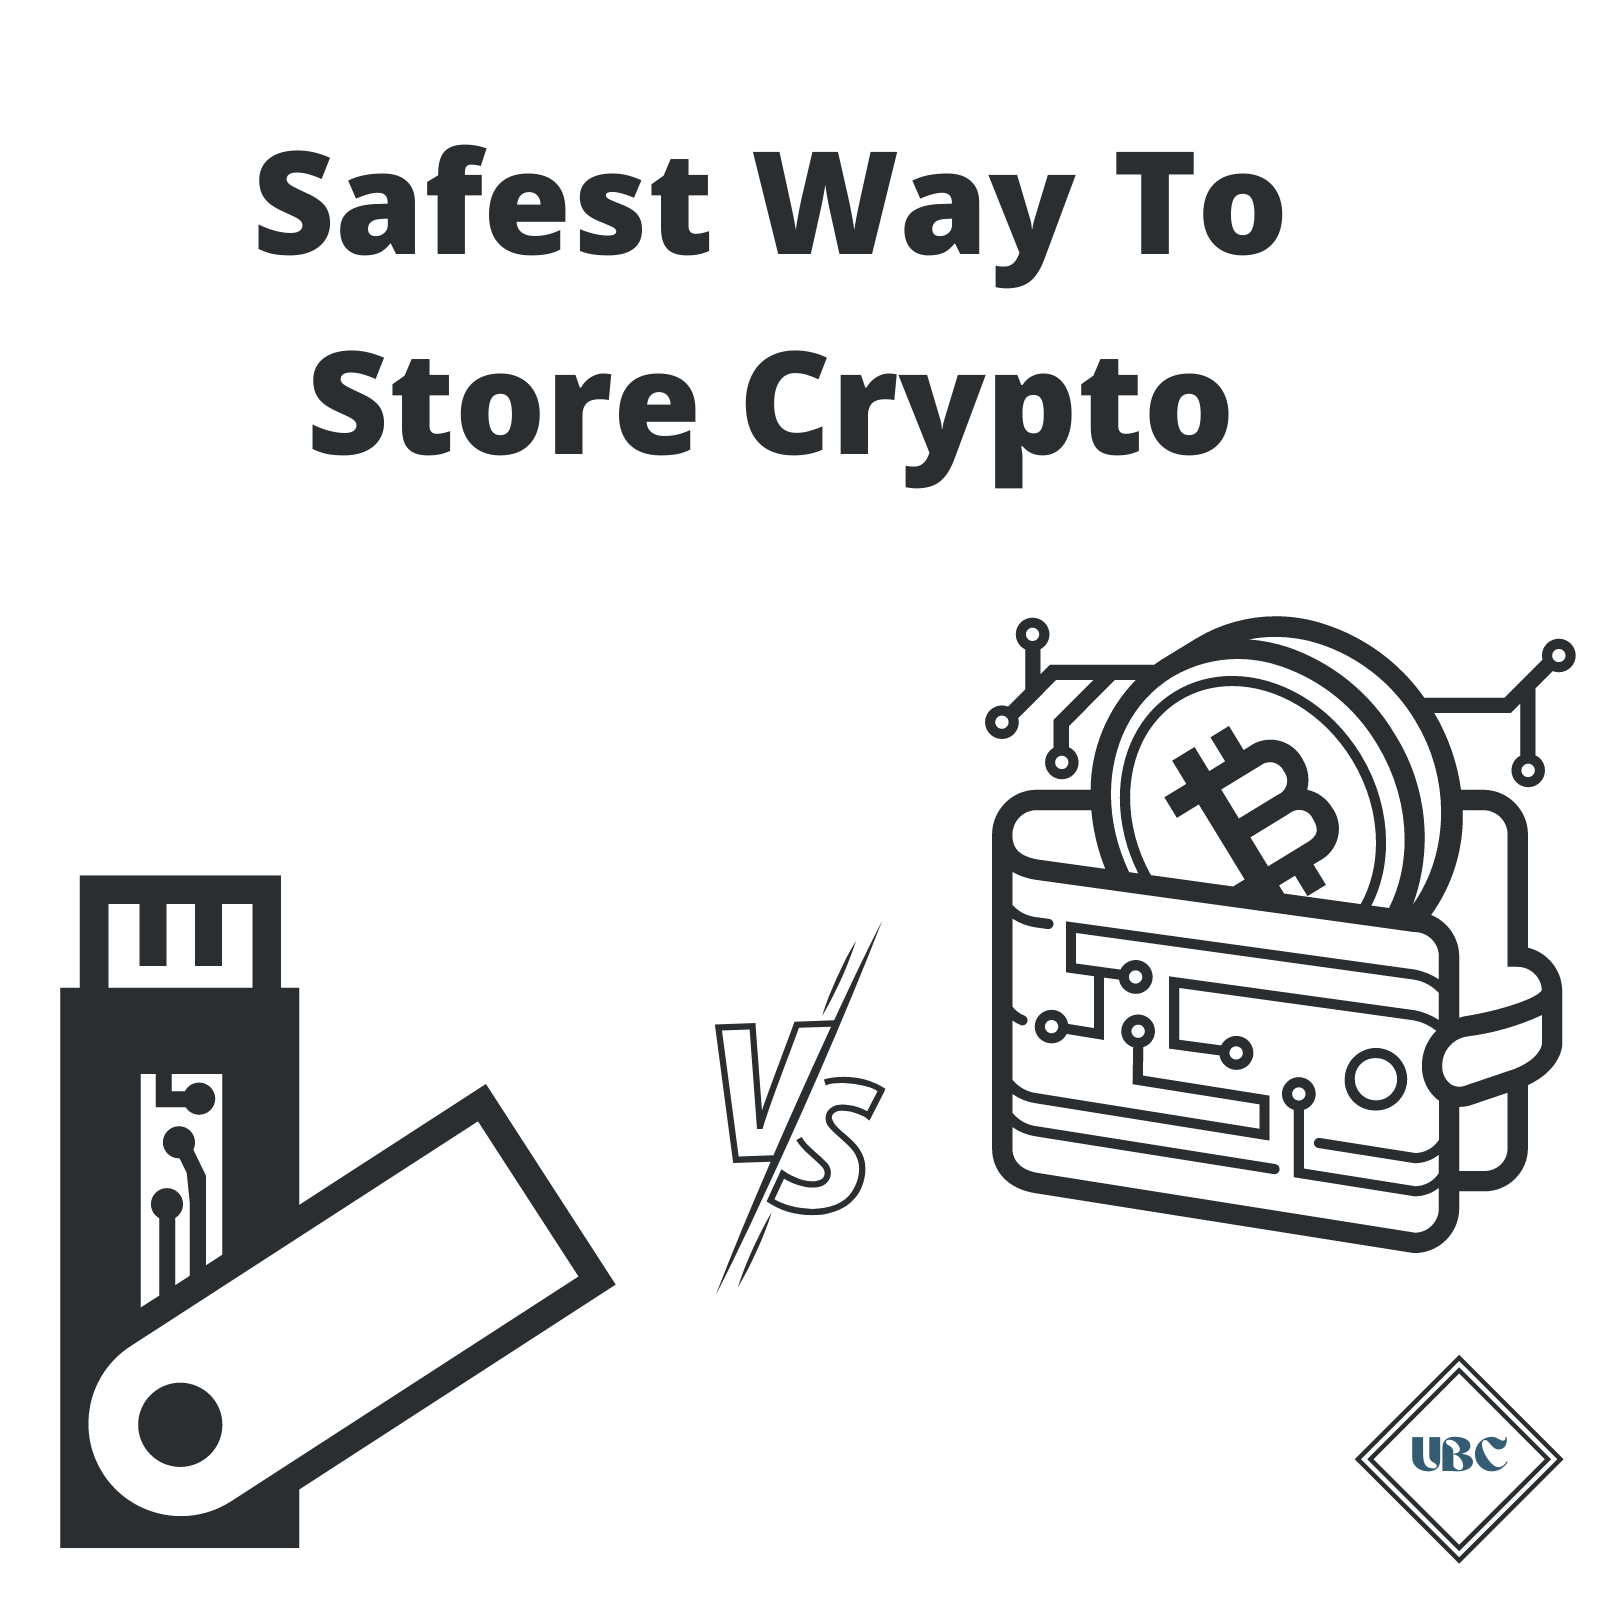 Top 10 Ways To Store Cryptocurrency In With Immense Security